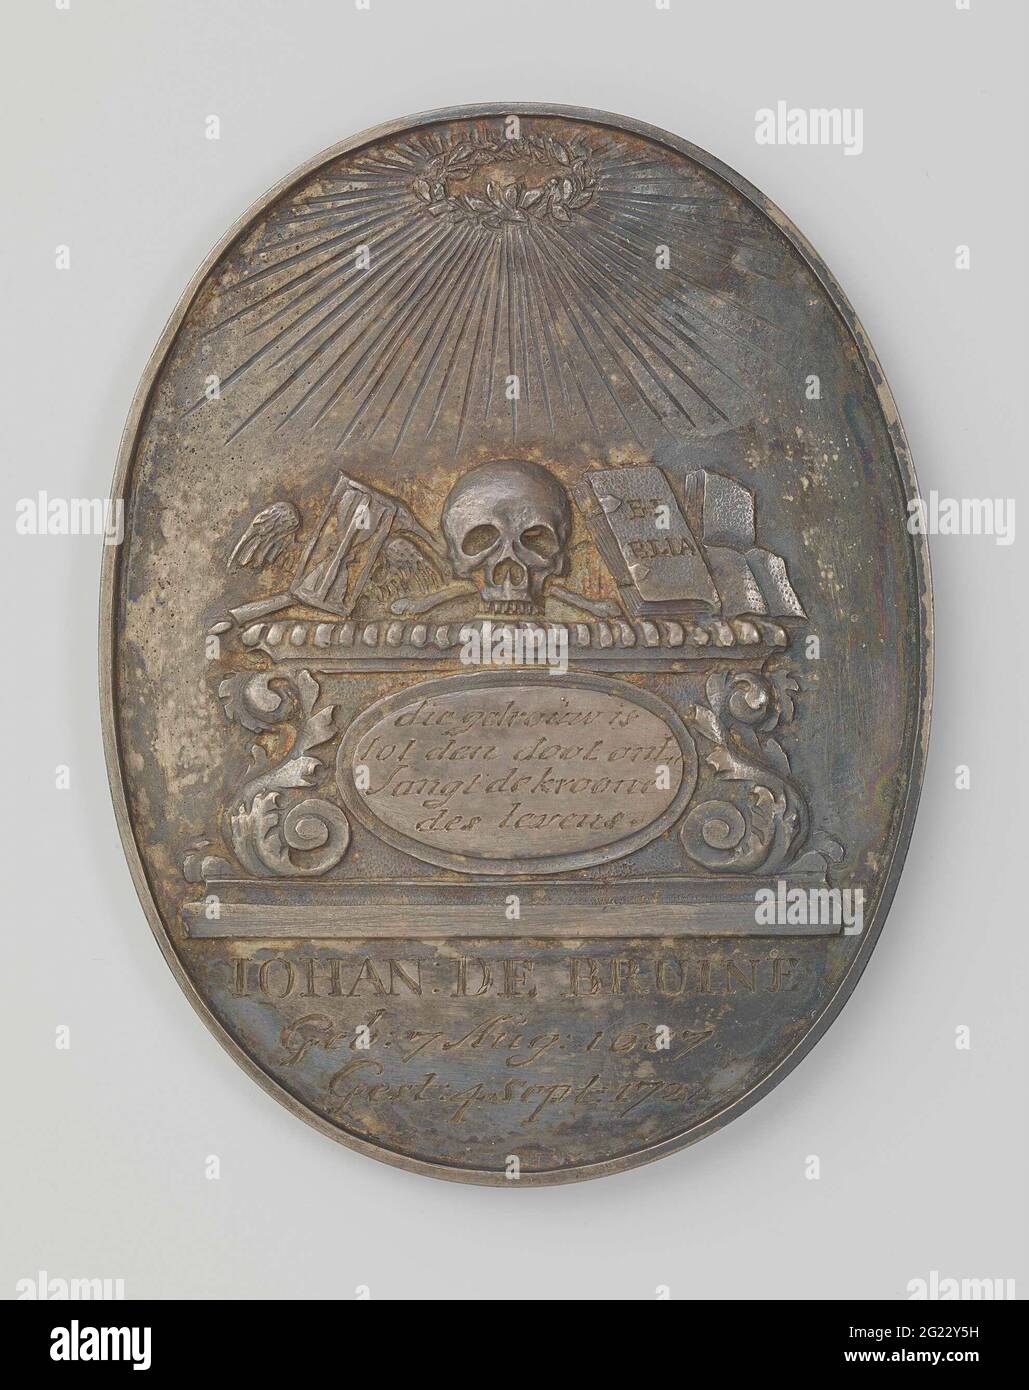 Death of Johannes de Bruine, pastor at De Knipe, Staveren, Sluis, Wezel, Dordrecht and the S-Gravenhage. Silver oval medal. Front: skull, extinguished torch, winged hourglass, Bible and other books on altar with medallion with inscription, above it radiant olive wreath; Cut out: inscription. Downside: inscription; At the bottom of appreciation and mastertics Stock Photo